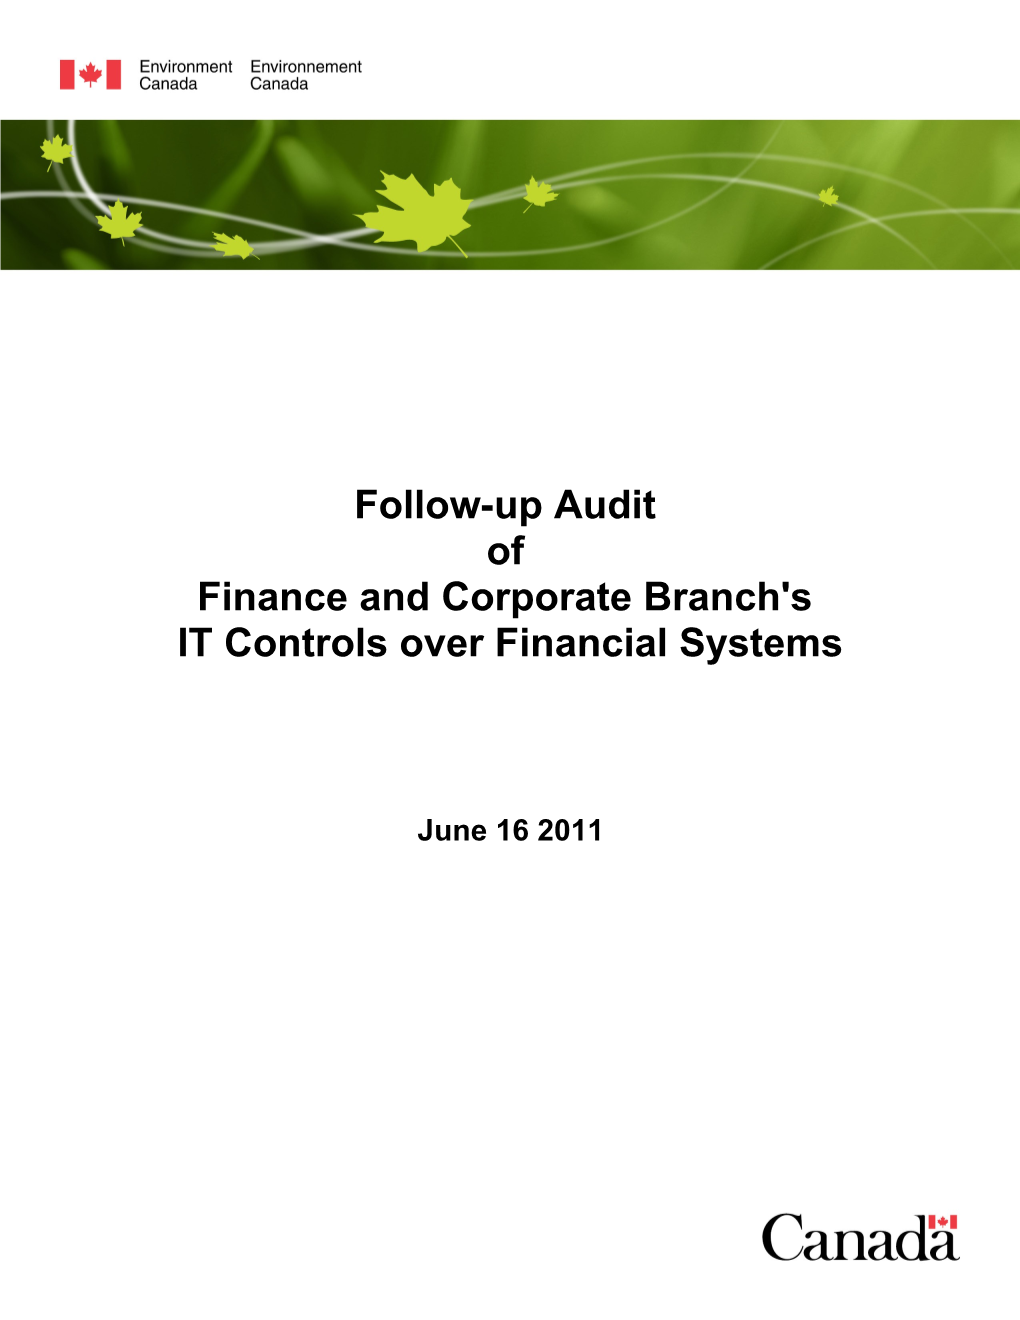 Follow-Up Audit of Finance and Corporate Branch's IT Controls Over Financial Systems